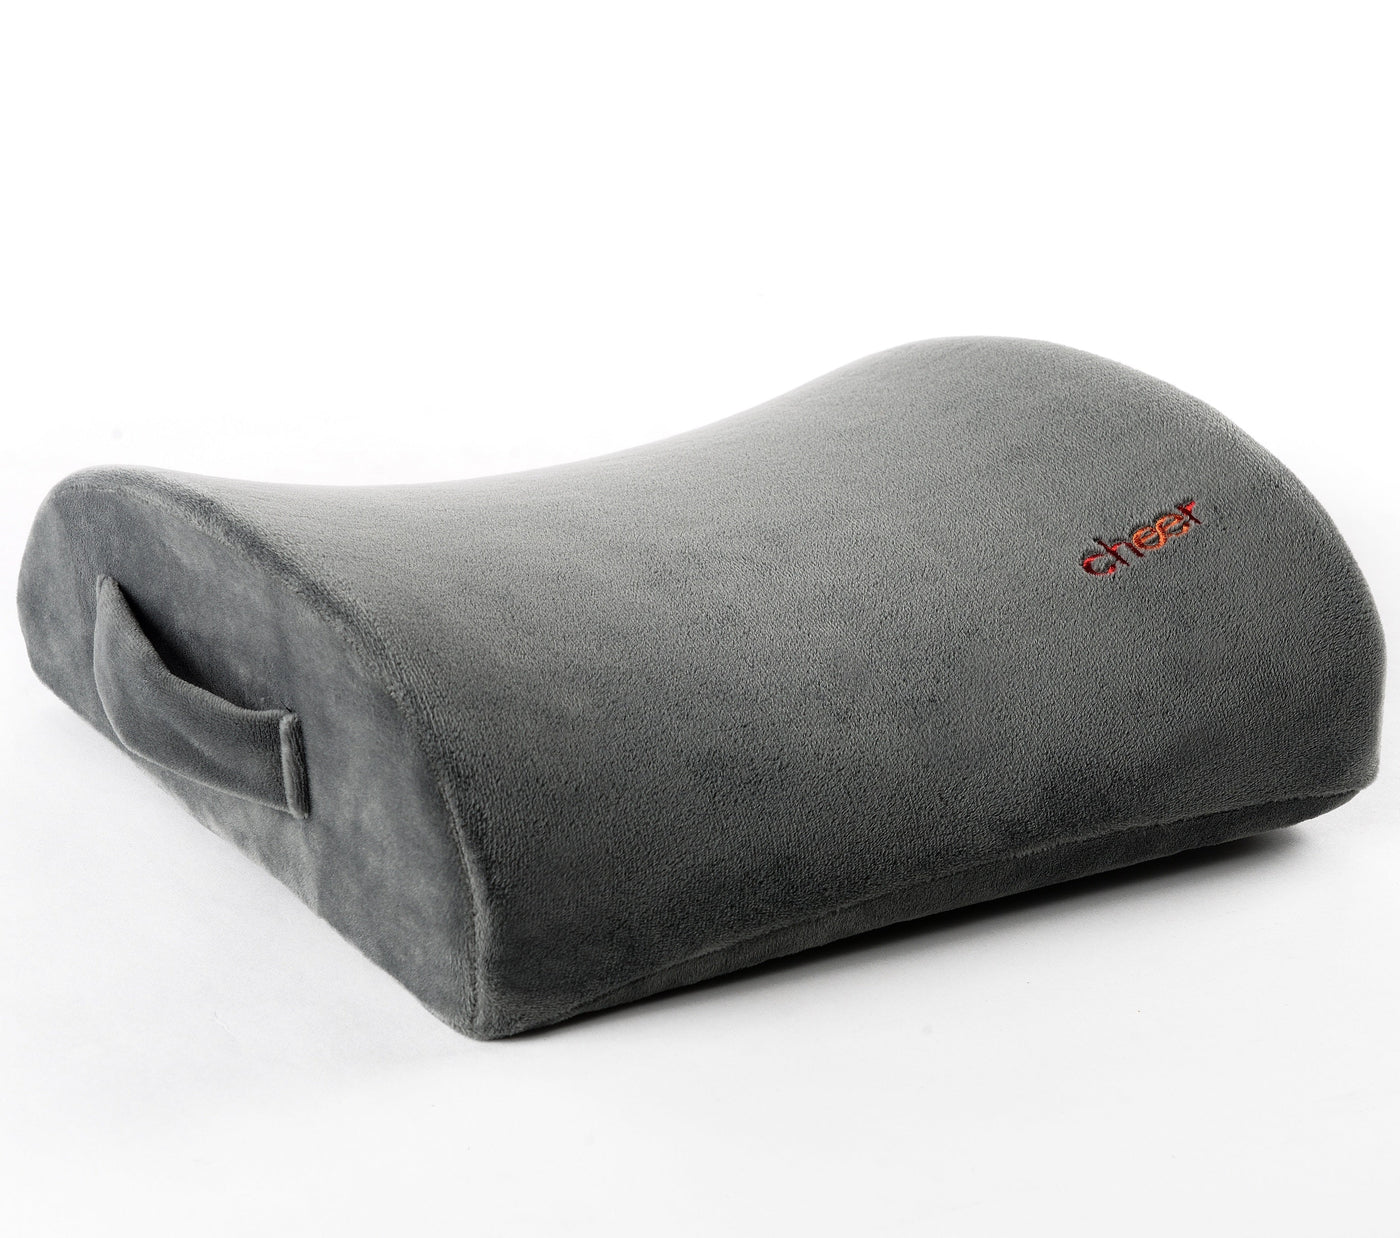 https://www.cheercollection.com/cdn/shop/products/cheer-collection-memory-foam-lumbar-cushion-for-lower-back-pain-relief-and-support-pillow-893222_1400x.jpg?v=1671779513